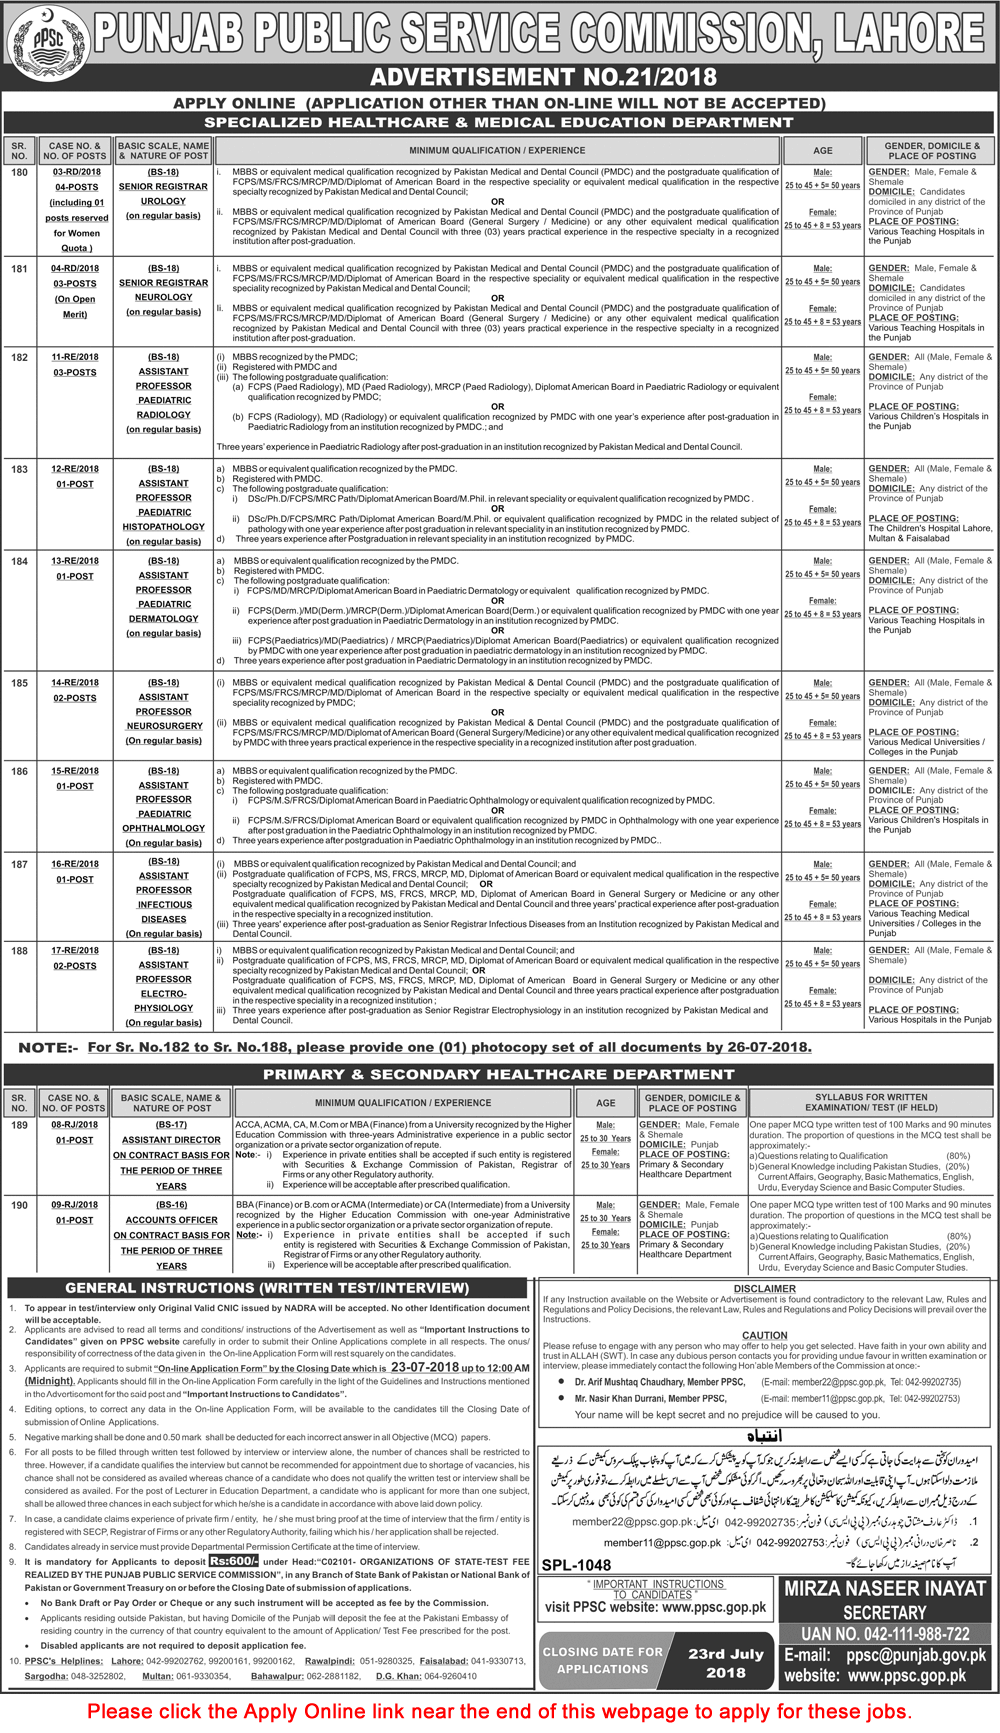 PPSC Jobs July 2018 Apply Online Consolidated Advertisement No 21/2018 Latest